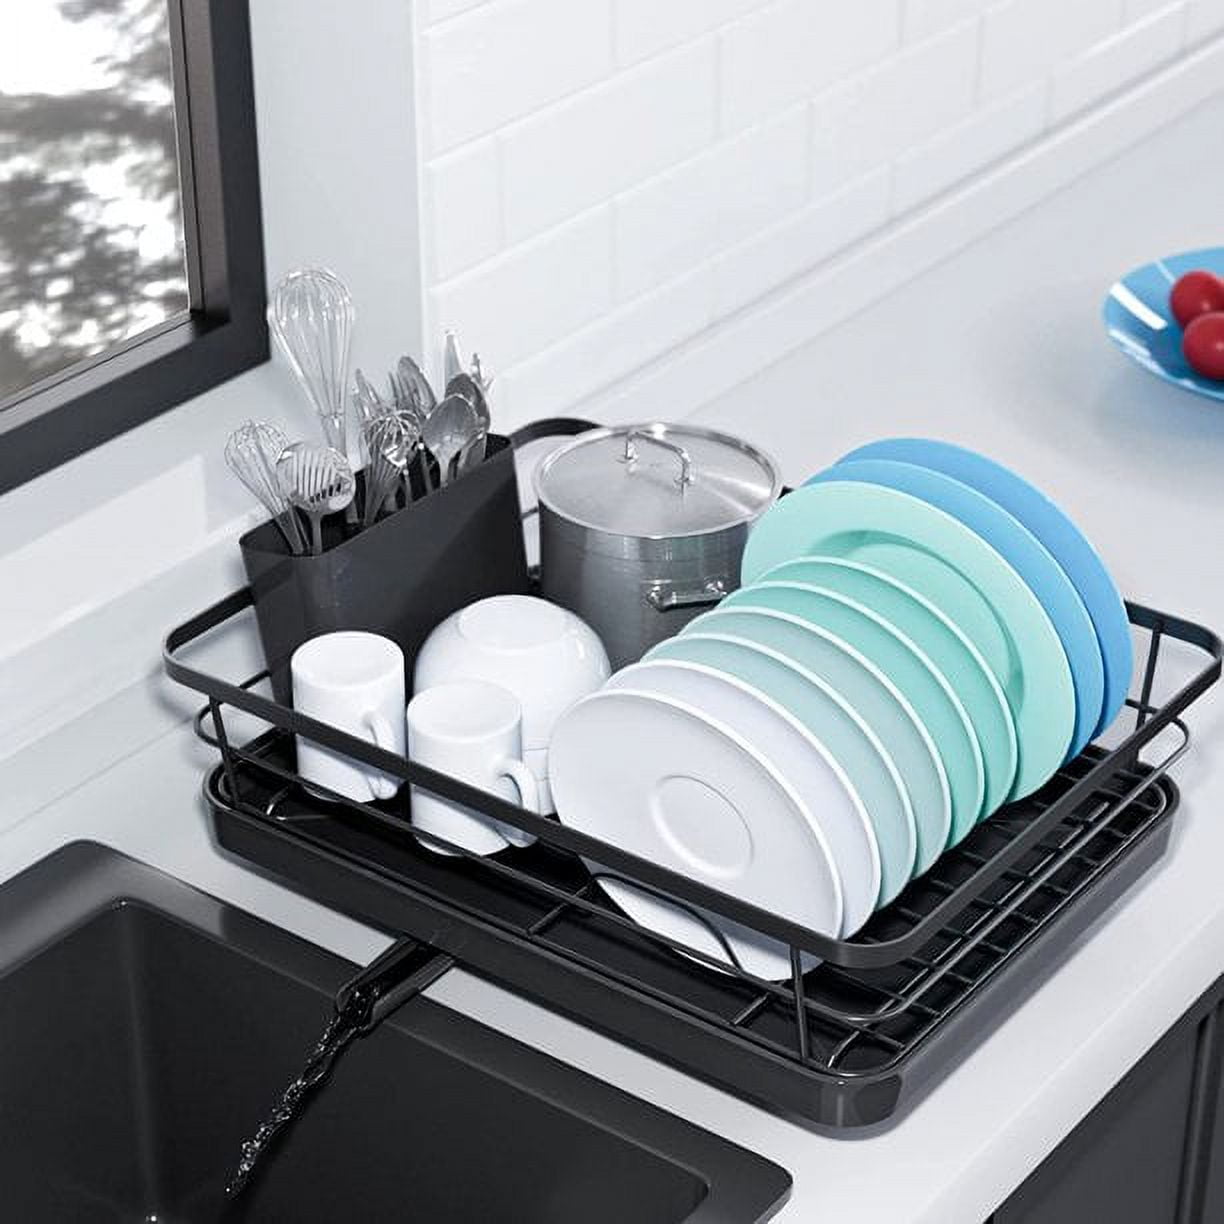 All-in-One Portable Dish Drying Rack - Store And Dry Plates, Bowls, Mugs,  Glasses, Knives, Utensils In One Place